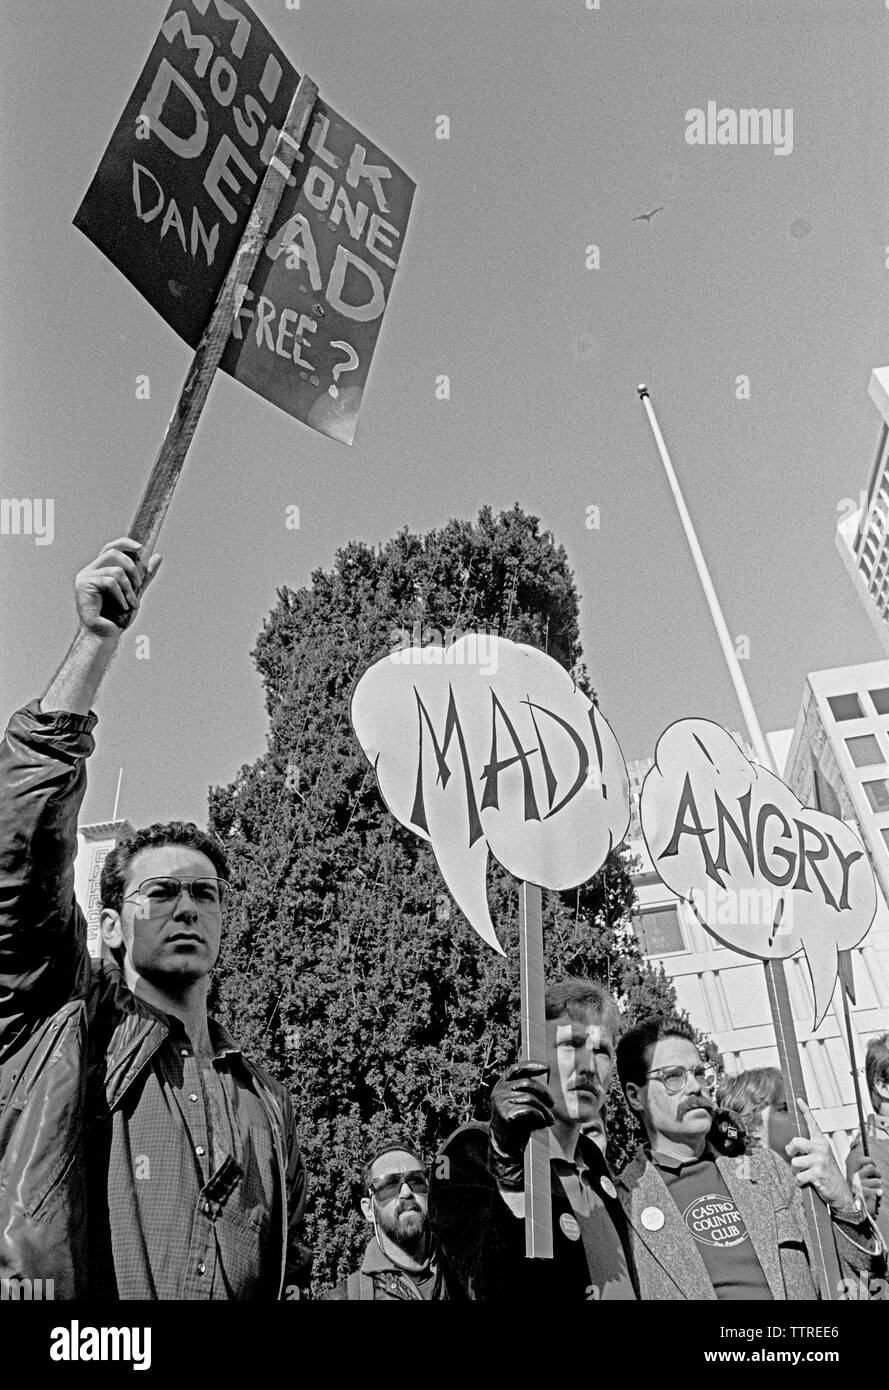 angry, mad, protest of the Dan White sentence for the assassination of Gay Supervisor Harvey Milk and Mayor George Moscone in San Francisco, California, 1970s Stock Photo